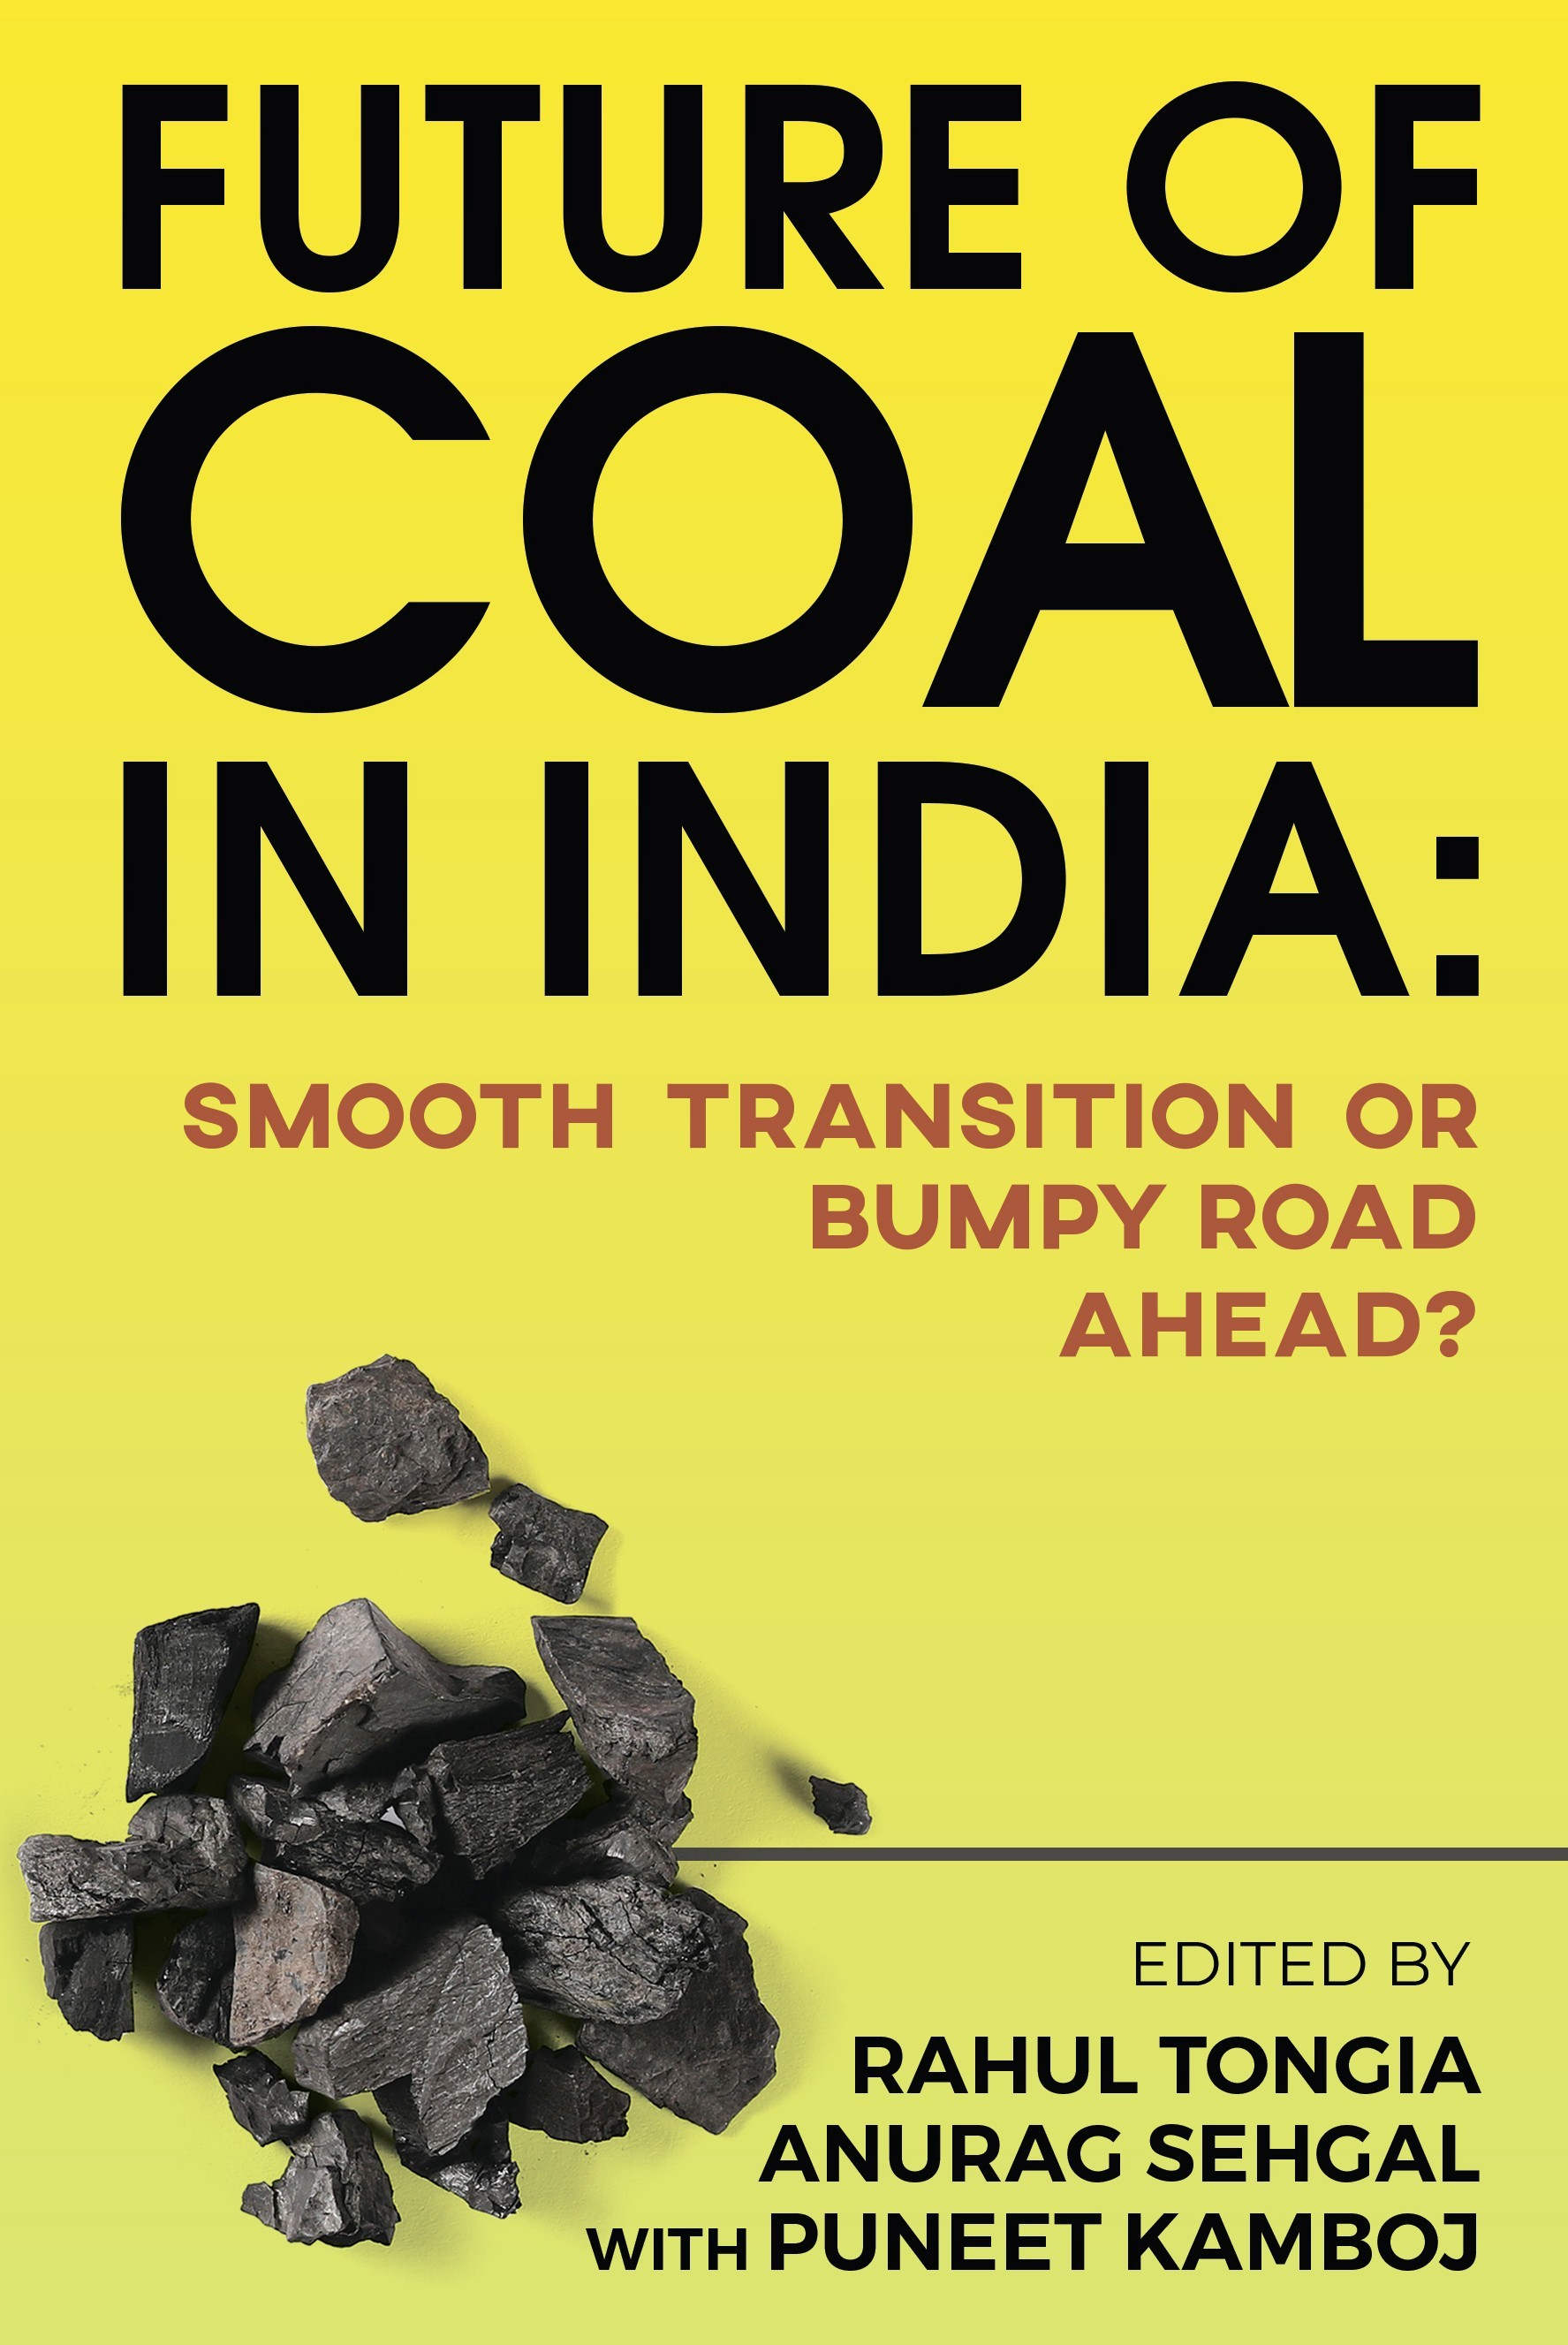 Future of Coal in India: Smooth Transition or Bumpy Road Ahead?